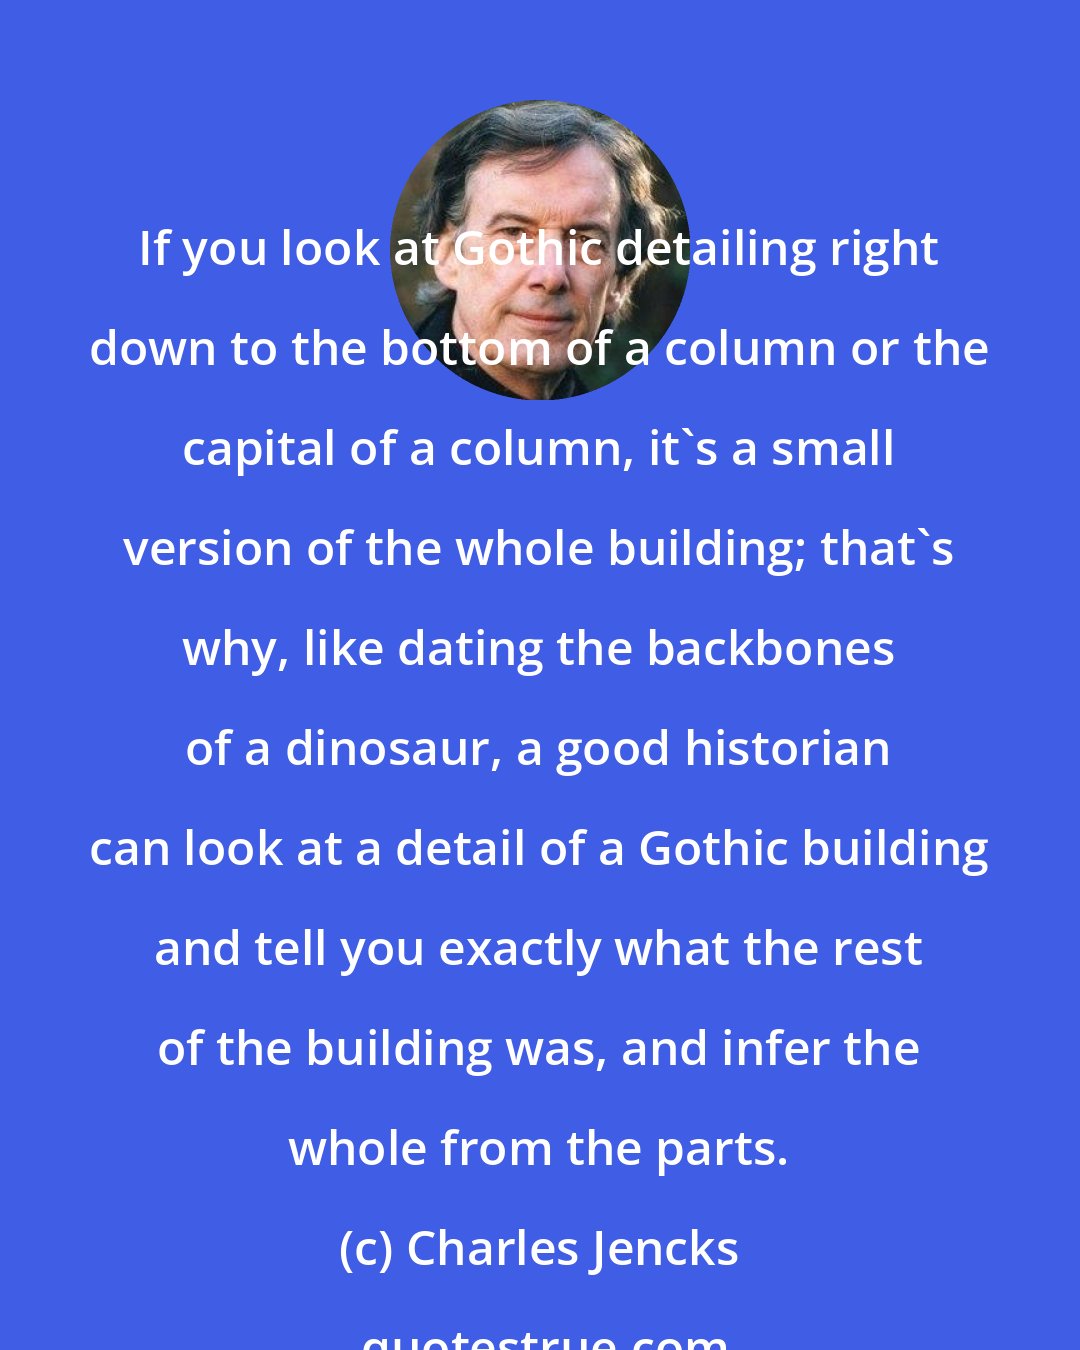 Charles Jencks: If you look at Gothic detailing right down to the bottom of a column or the capital of a column, it's a small version of the whole building; that's why, like dating the backbones of a dinosaur, a good historian can look at a detail of a Gothic building and tell you exactly what the rest of the building was, and infer the whole from the parts.